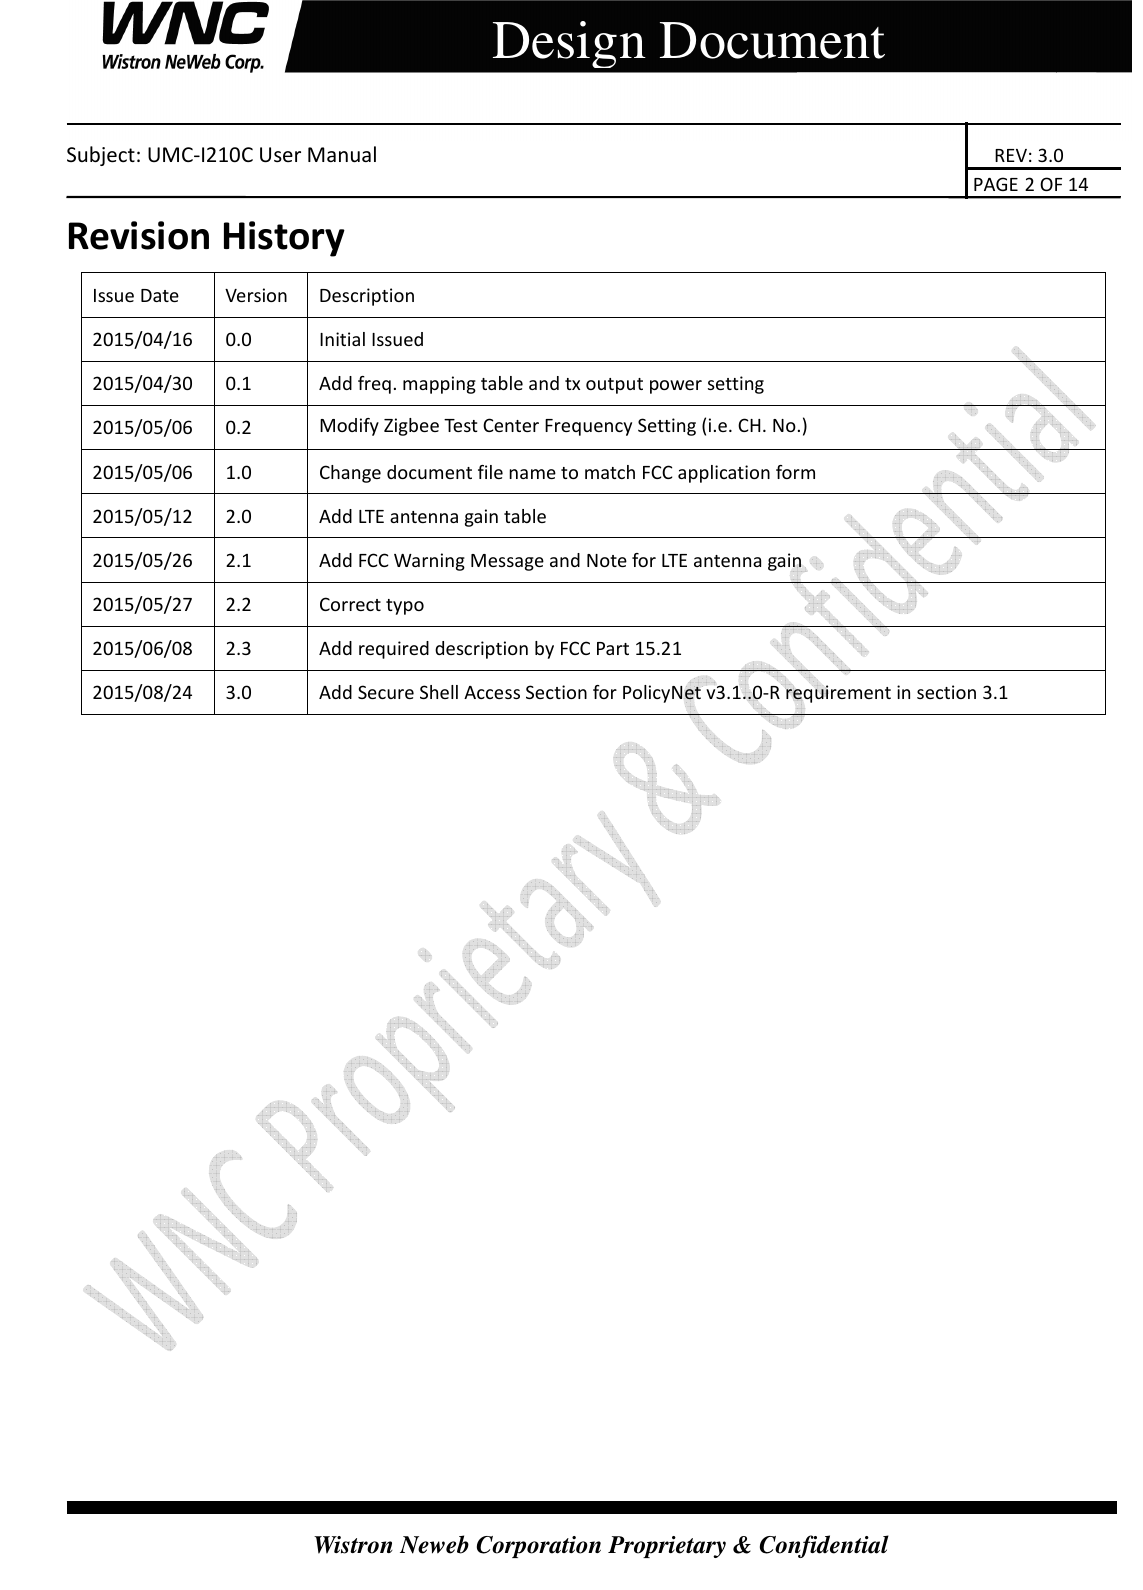    Subject: UMC-I210C User Manual                                                                       REV: 3.0                                                                                                                                                                               PAGE 2 OF 14  Wistron Neweb Corporation Proprietary &amp; Confidential     Design Document Revision History Issue Date  Version  Description 2015/04/16  0.0  Initial Issued 2015/04/30  0.1  Add freq. mapping table and tx output power setting 2015/05/06  0.2  Modify Zigbee Test Center Frequency Setting (i.e. CH. No.) 2015/05/06  1.0  Change document file name to match FCC application form 2015/05/12  2.0  Add LTE antenna gain table 2015/05/26  2.1  Add FCC Warning Message and Note for LTE antenna gain 2015/05/27  2.2  Correct typo 2015/06/08  2.3  Add required description by FCC Part 15.21 2015/08/24  3.0  Add Secure Shell Access Section for PolicyNet v3.1..0-R requirement in section 3.1                   